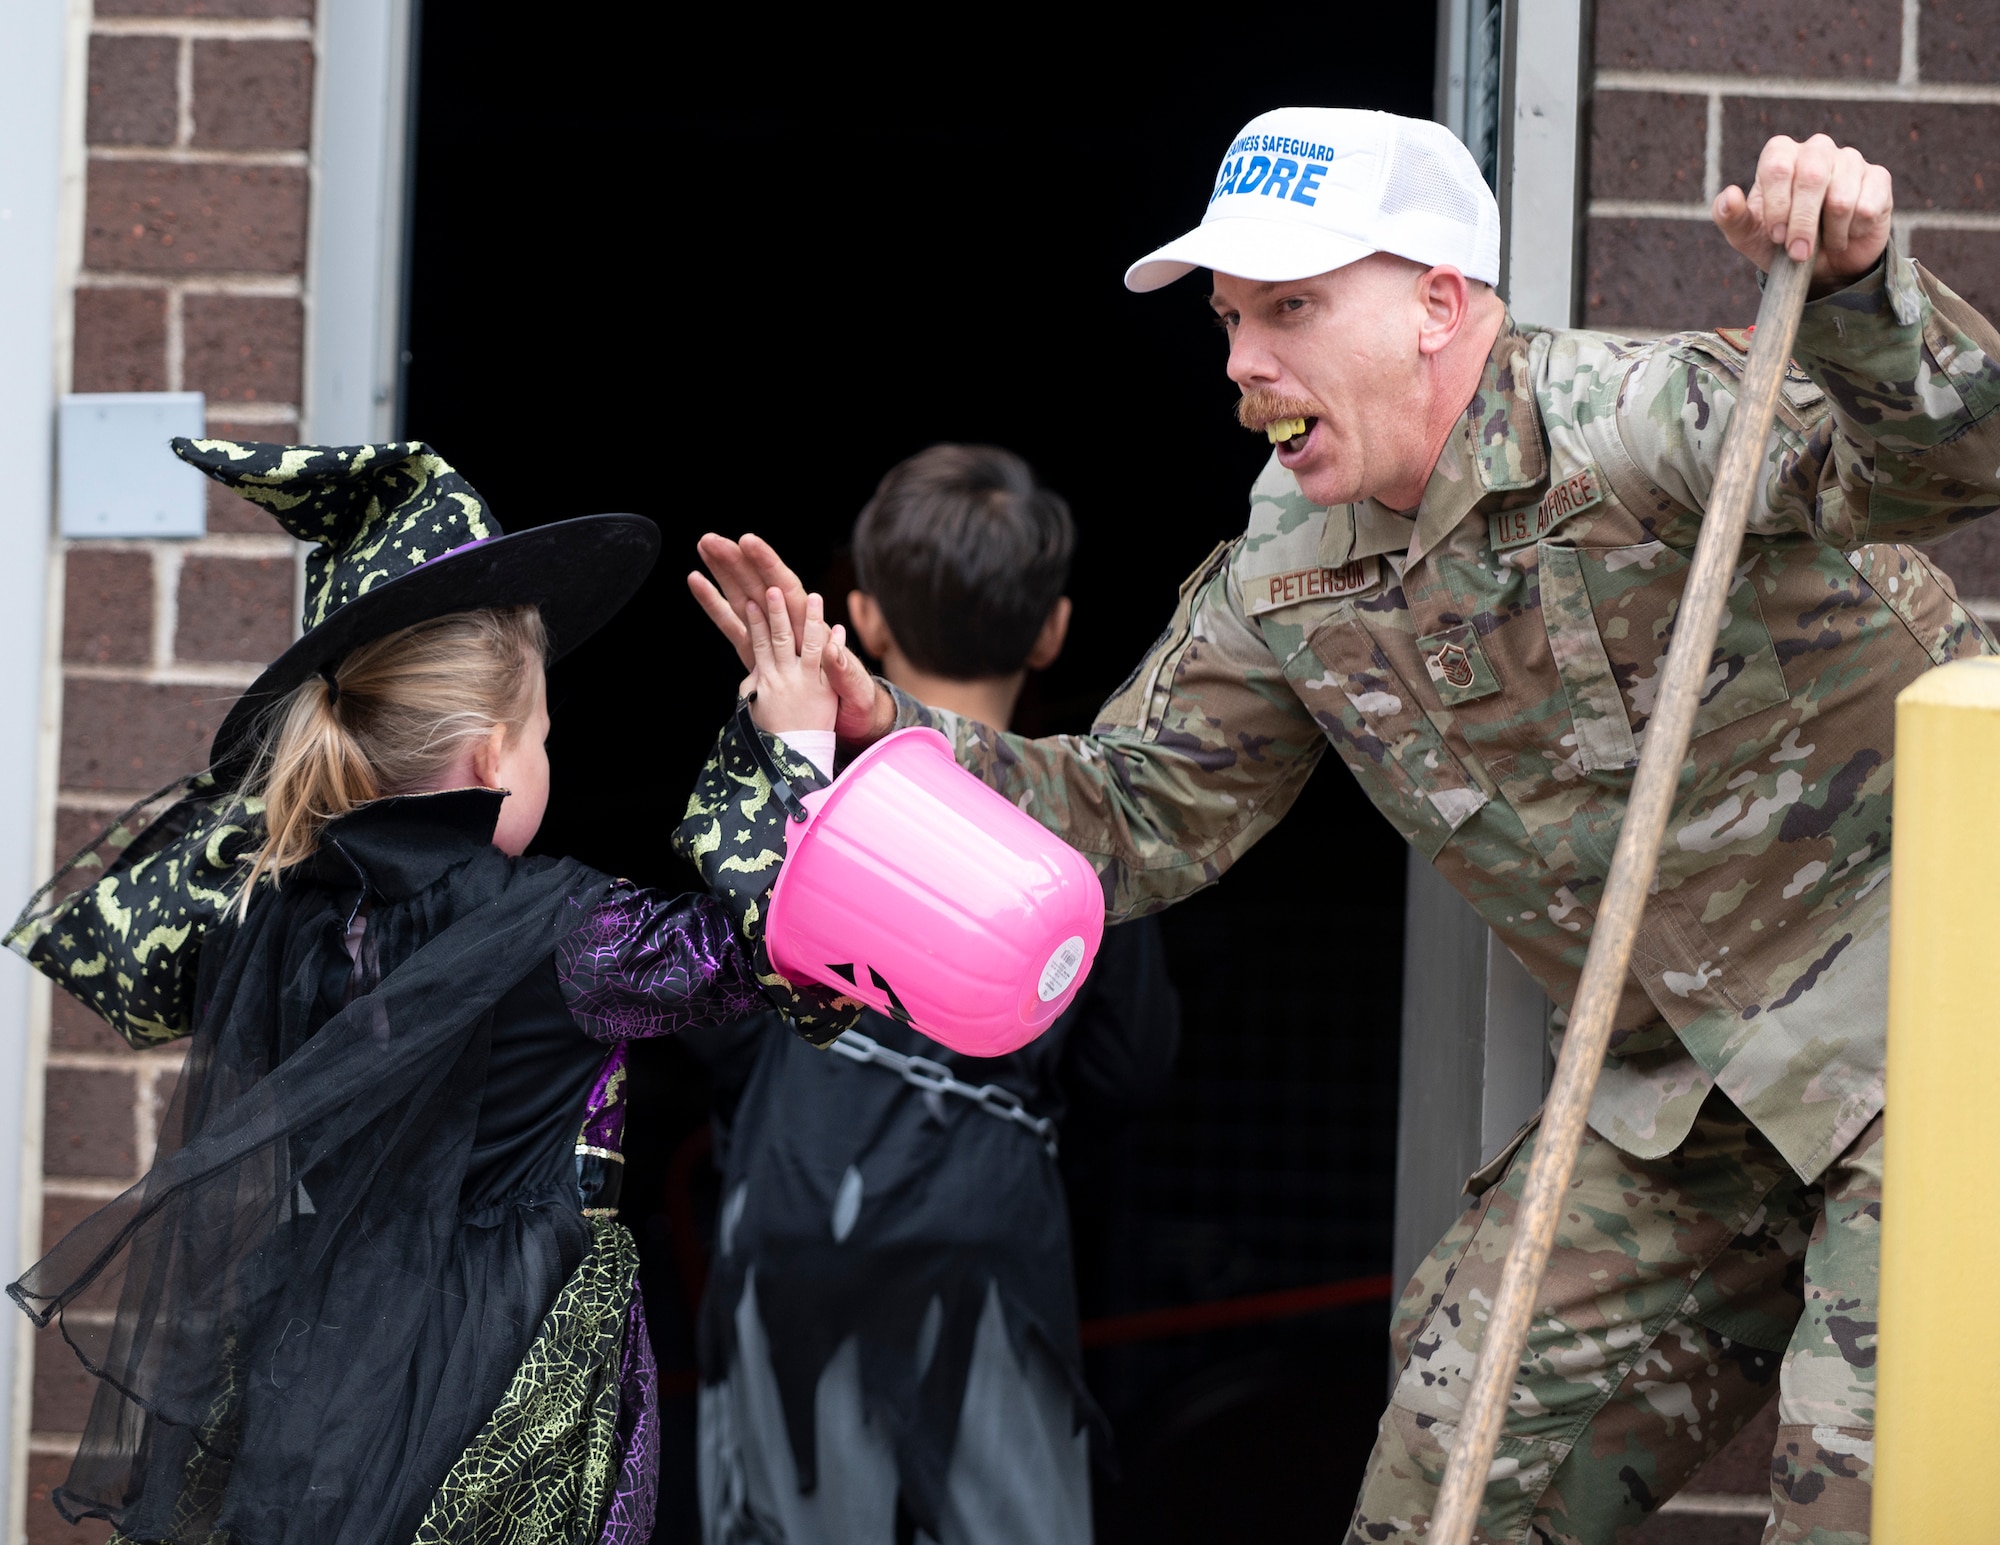 U.S. Air Force Airmen from the 133rd Airlift Wing handed out candy during a Halloween parade in St. Paul, Oct. 16, 2022.